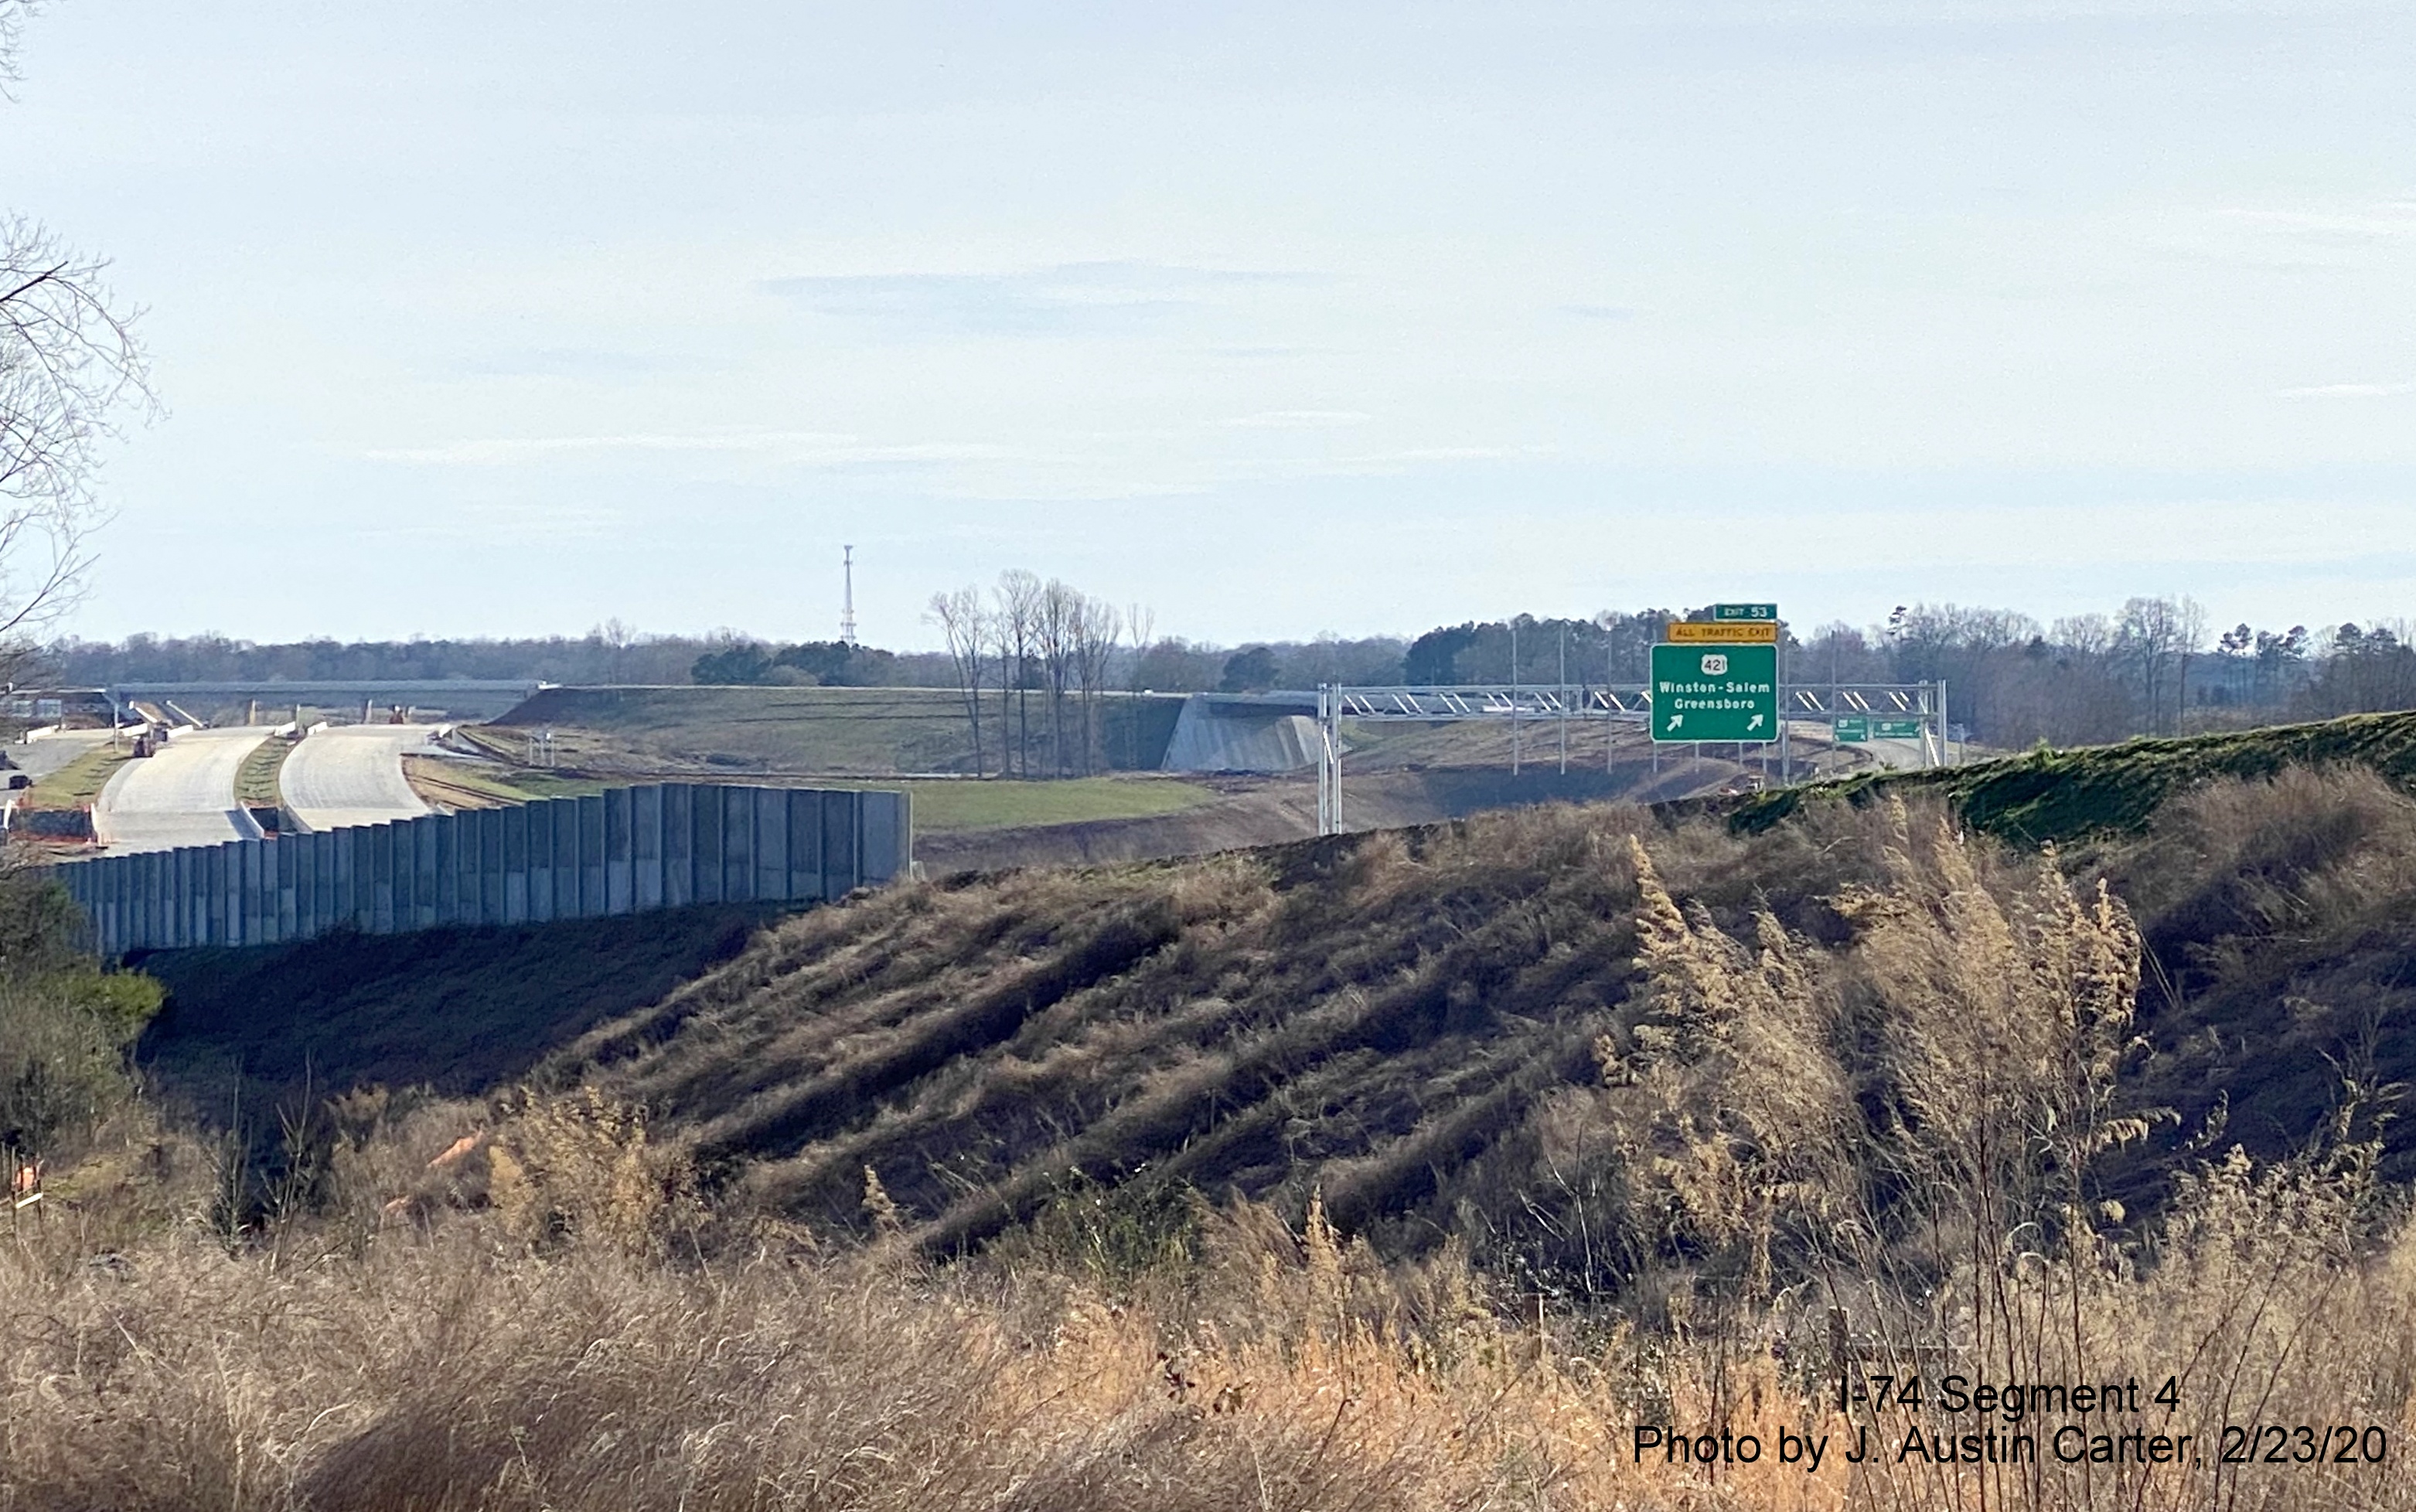 Image of new ramp signage installed for US 421 in vicinity of West Mountain Street 
        along Future I-74 East/Winston-Salem Beltway, by J. Austin Carter in Feb. 2020